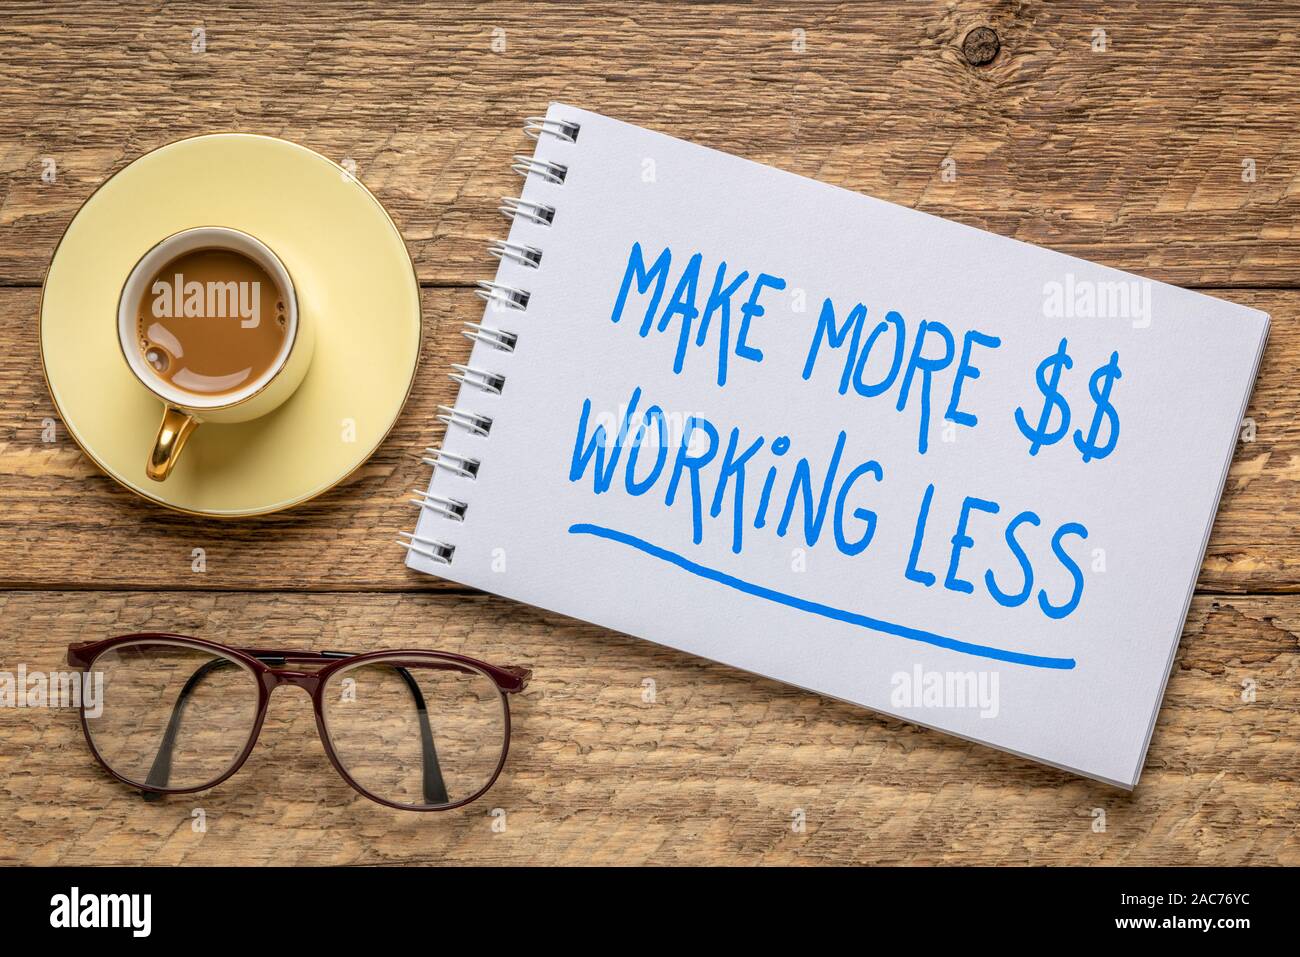 make more money working less - handwriting in a sketchbook with a cup of coffee, business productivity, efficiency, profit and success concept Stock Photo